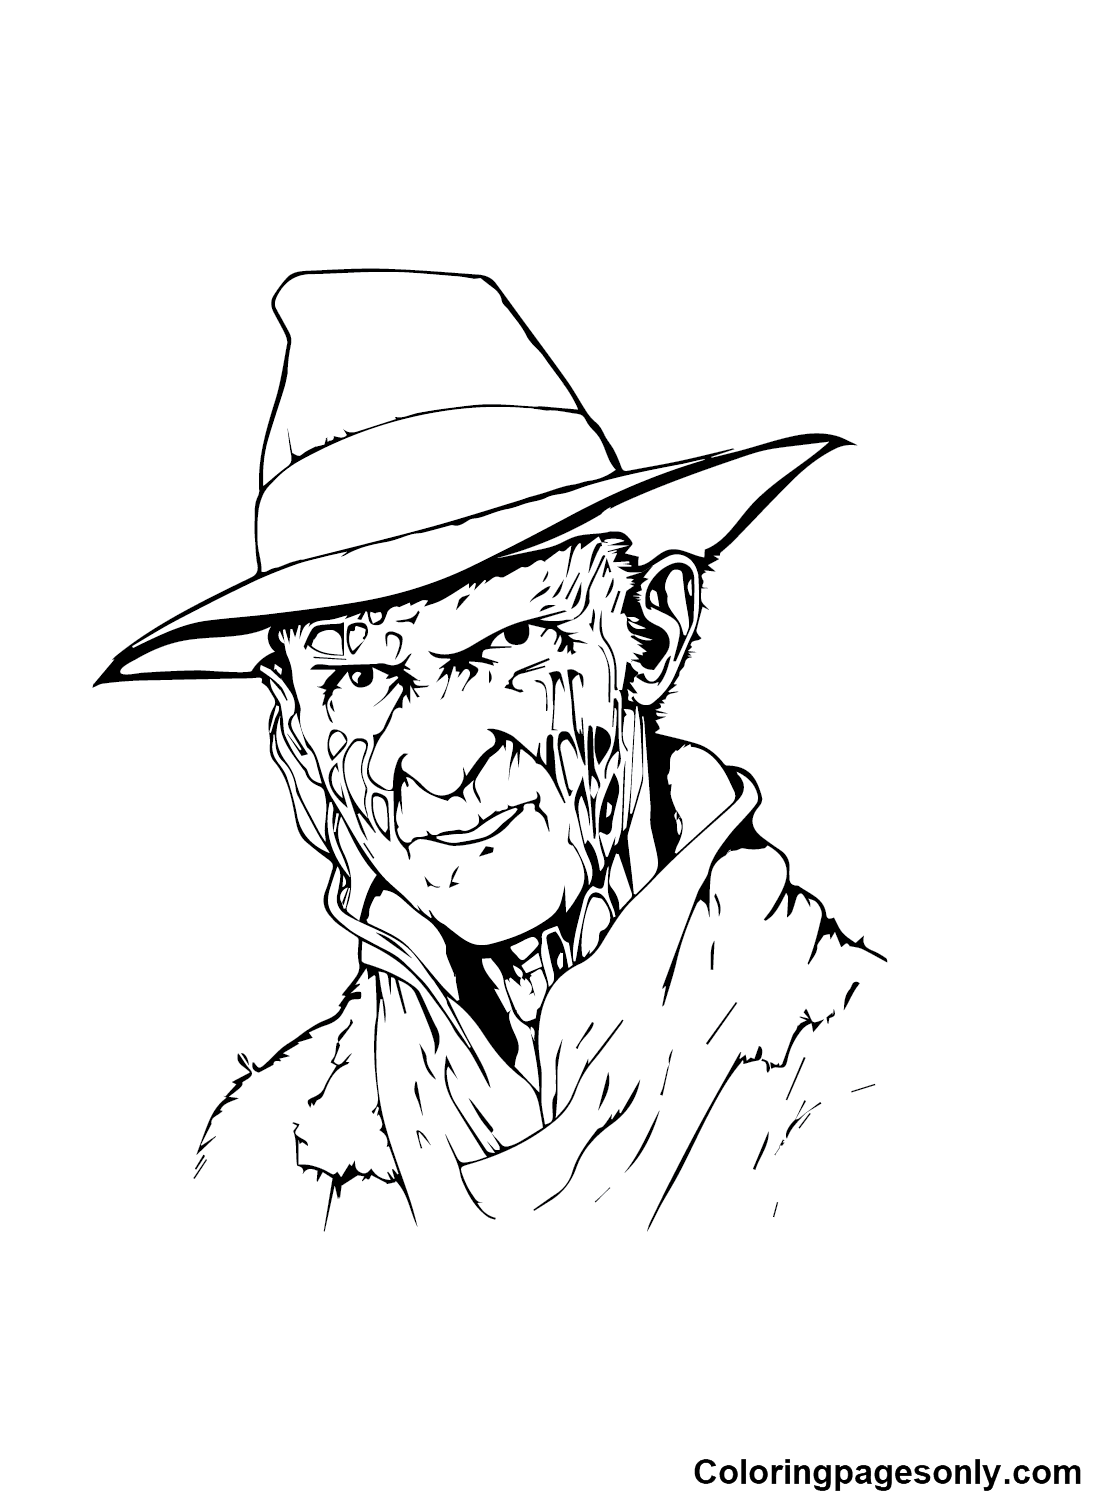 Freddy Krueger Free Coloring Pages